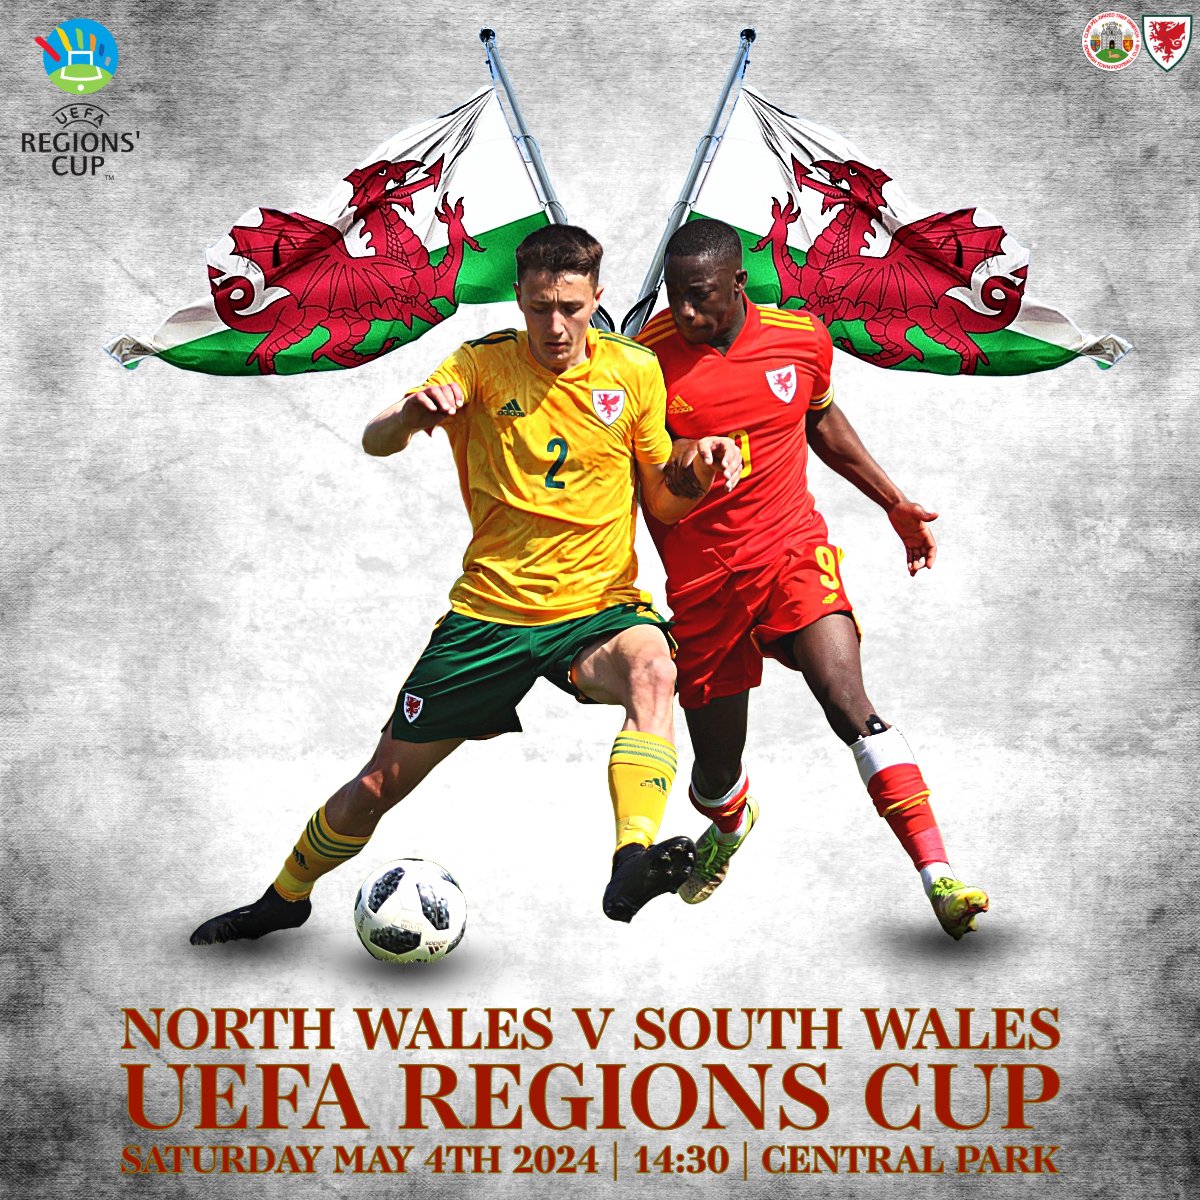 𝐍𝐎𝐑𝐓𝐇 𝐕 𝐒𝐎𝐔𝐓𝐇 🏴󠁧󠁢󠁷󠁬󠁳󠁿 The best of North Wales face the best of South Wales at Central Park on Saturday in the First Leg of the Regions Cup! Only one will head to Serbia to represent Cymru! #DTFC | @CymruLeagues